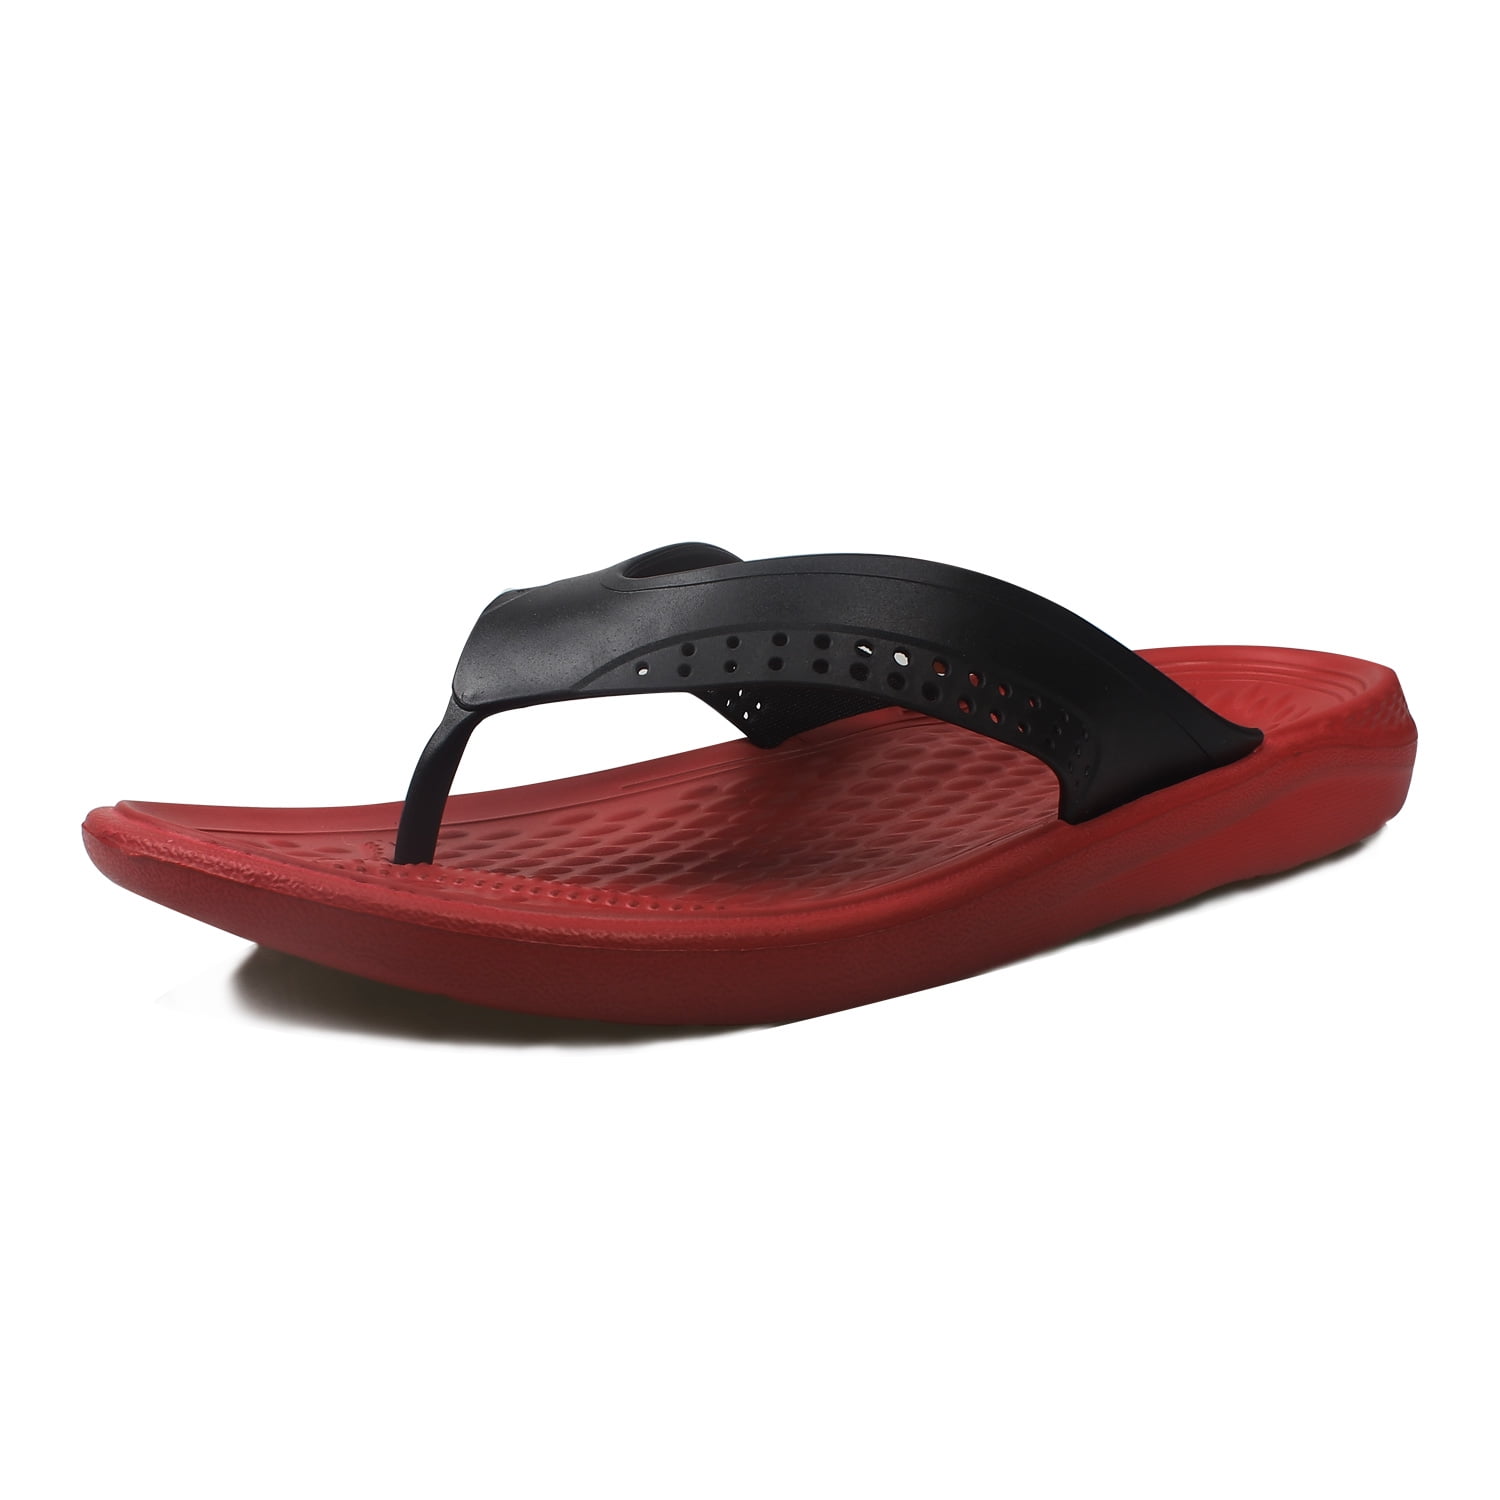 mens wide sandals with arch support